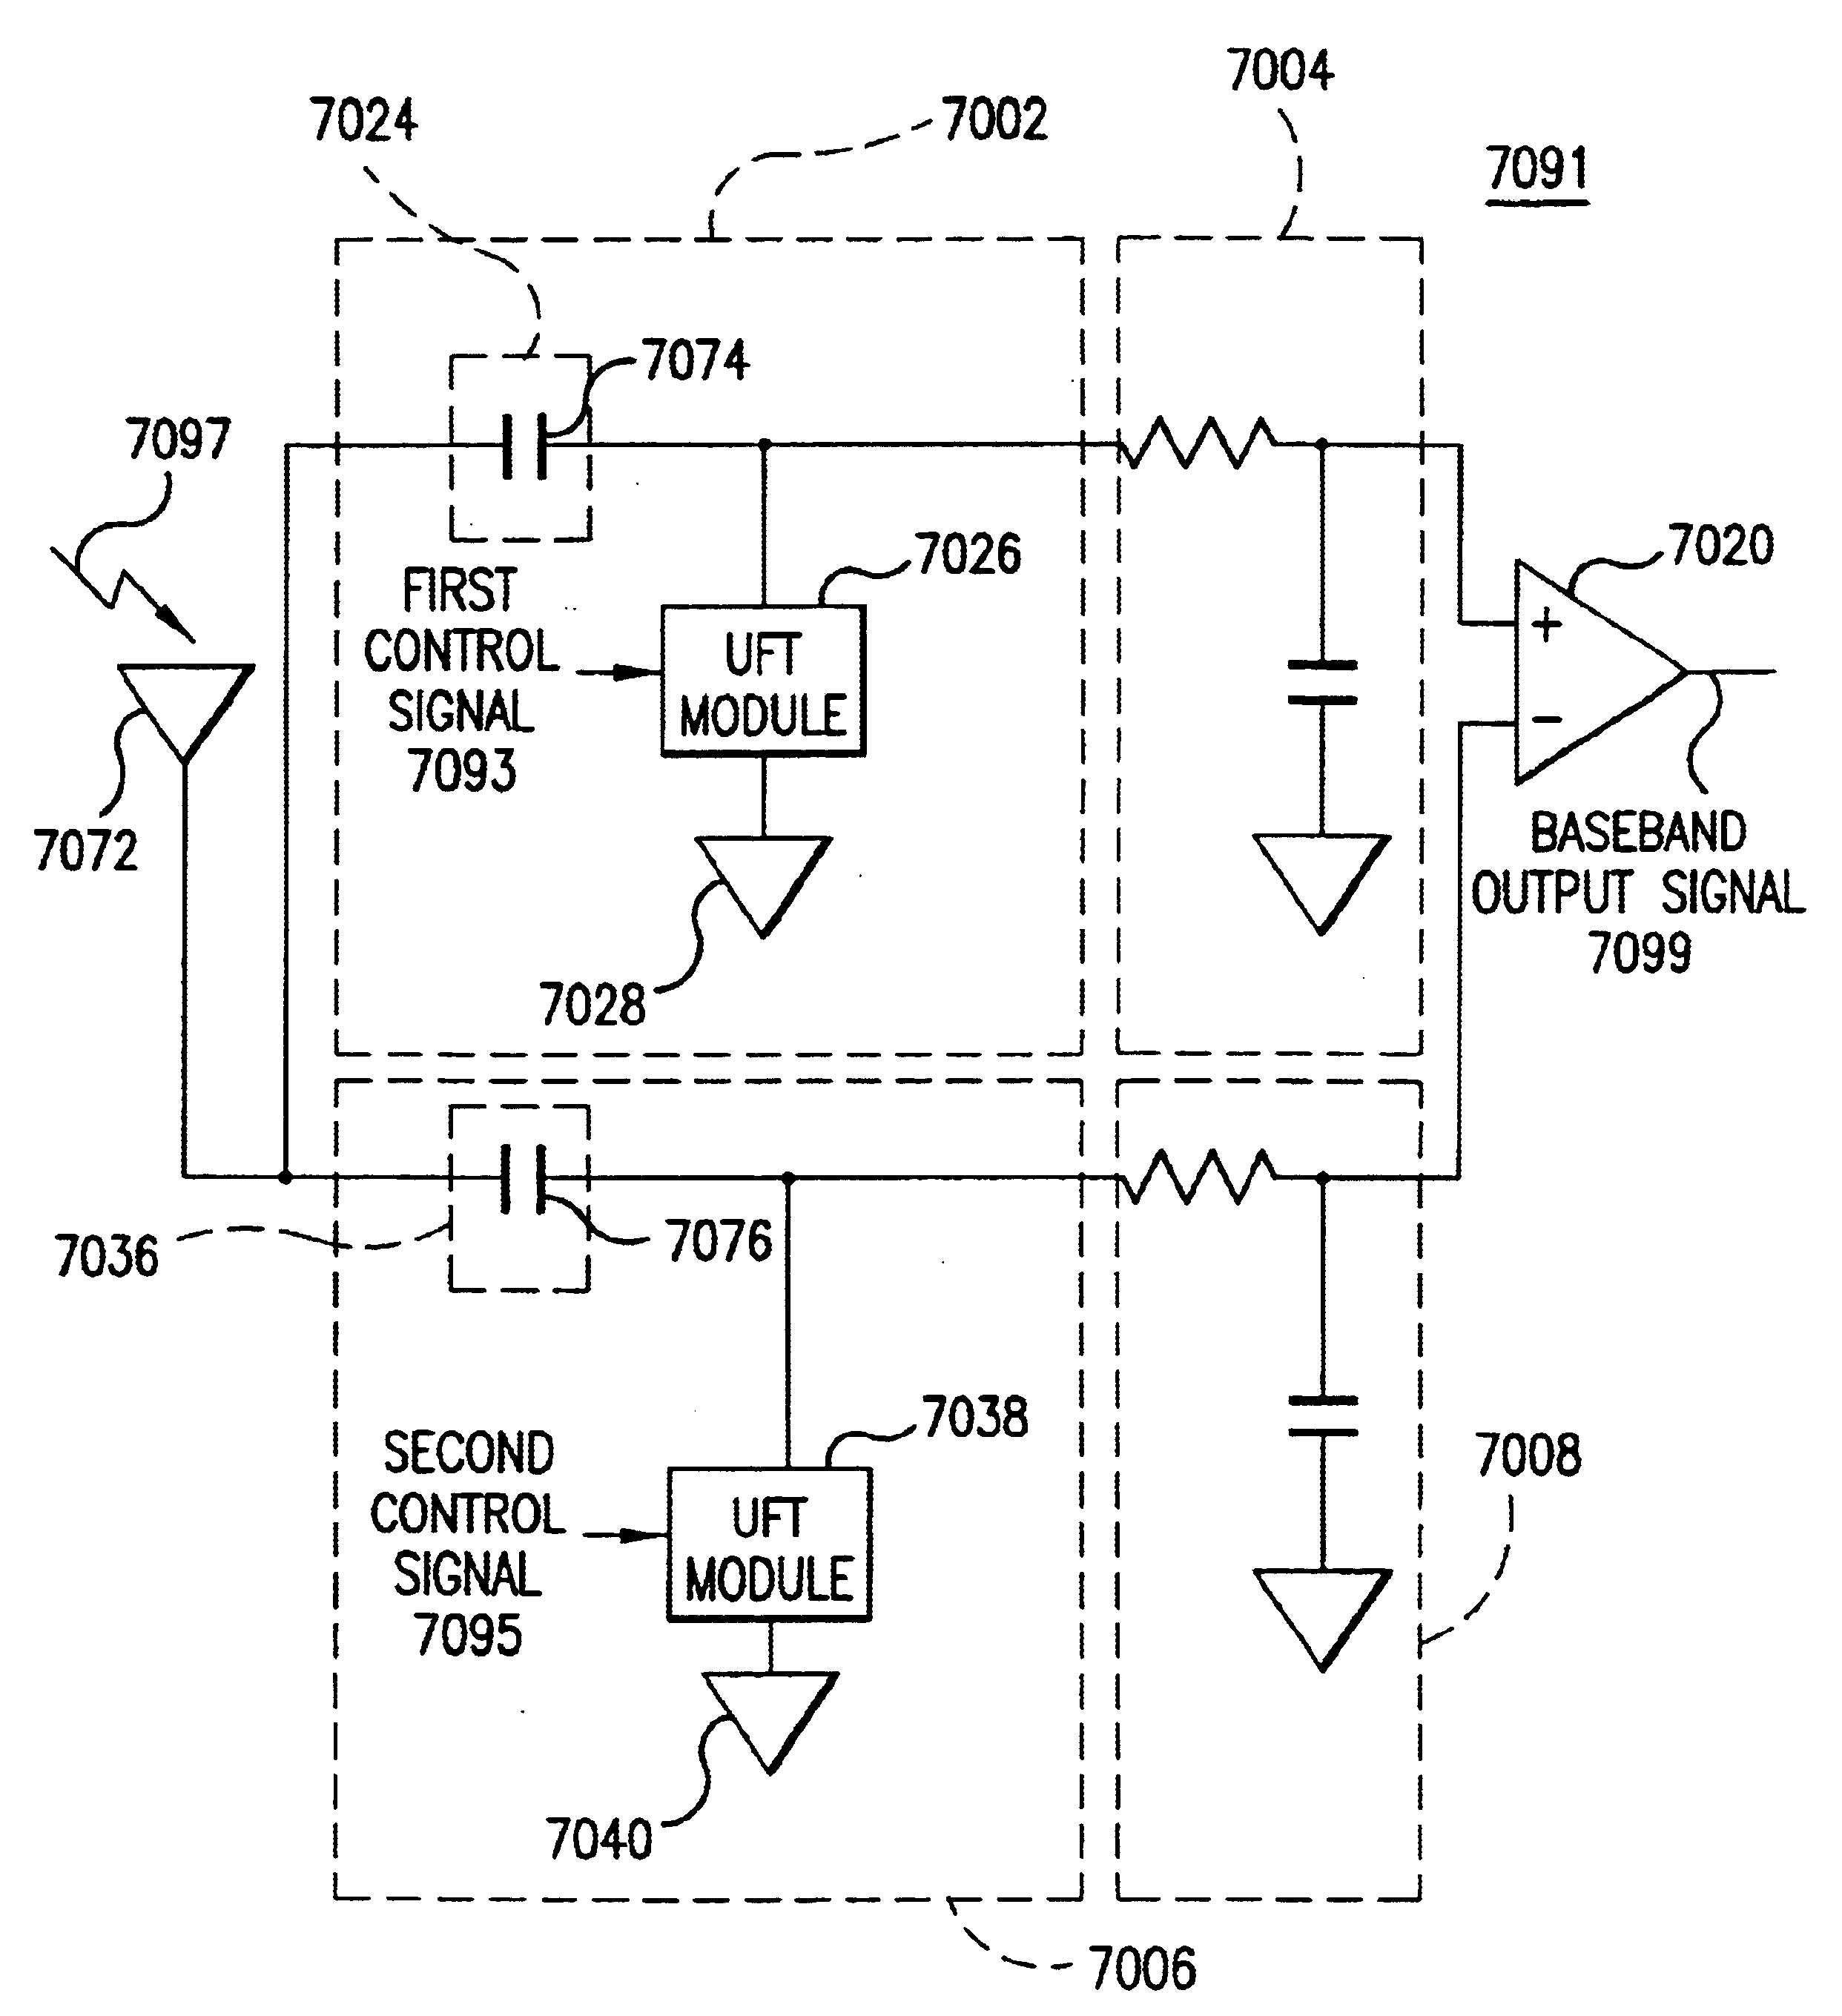 Wireless local area network (WLAN) using universal frequency translation technology including multi-phase embodiments and circuit implementations